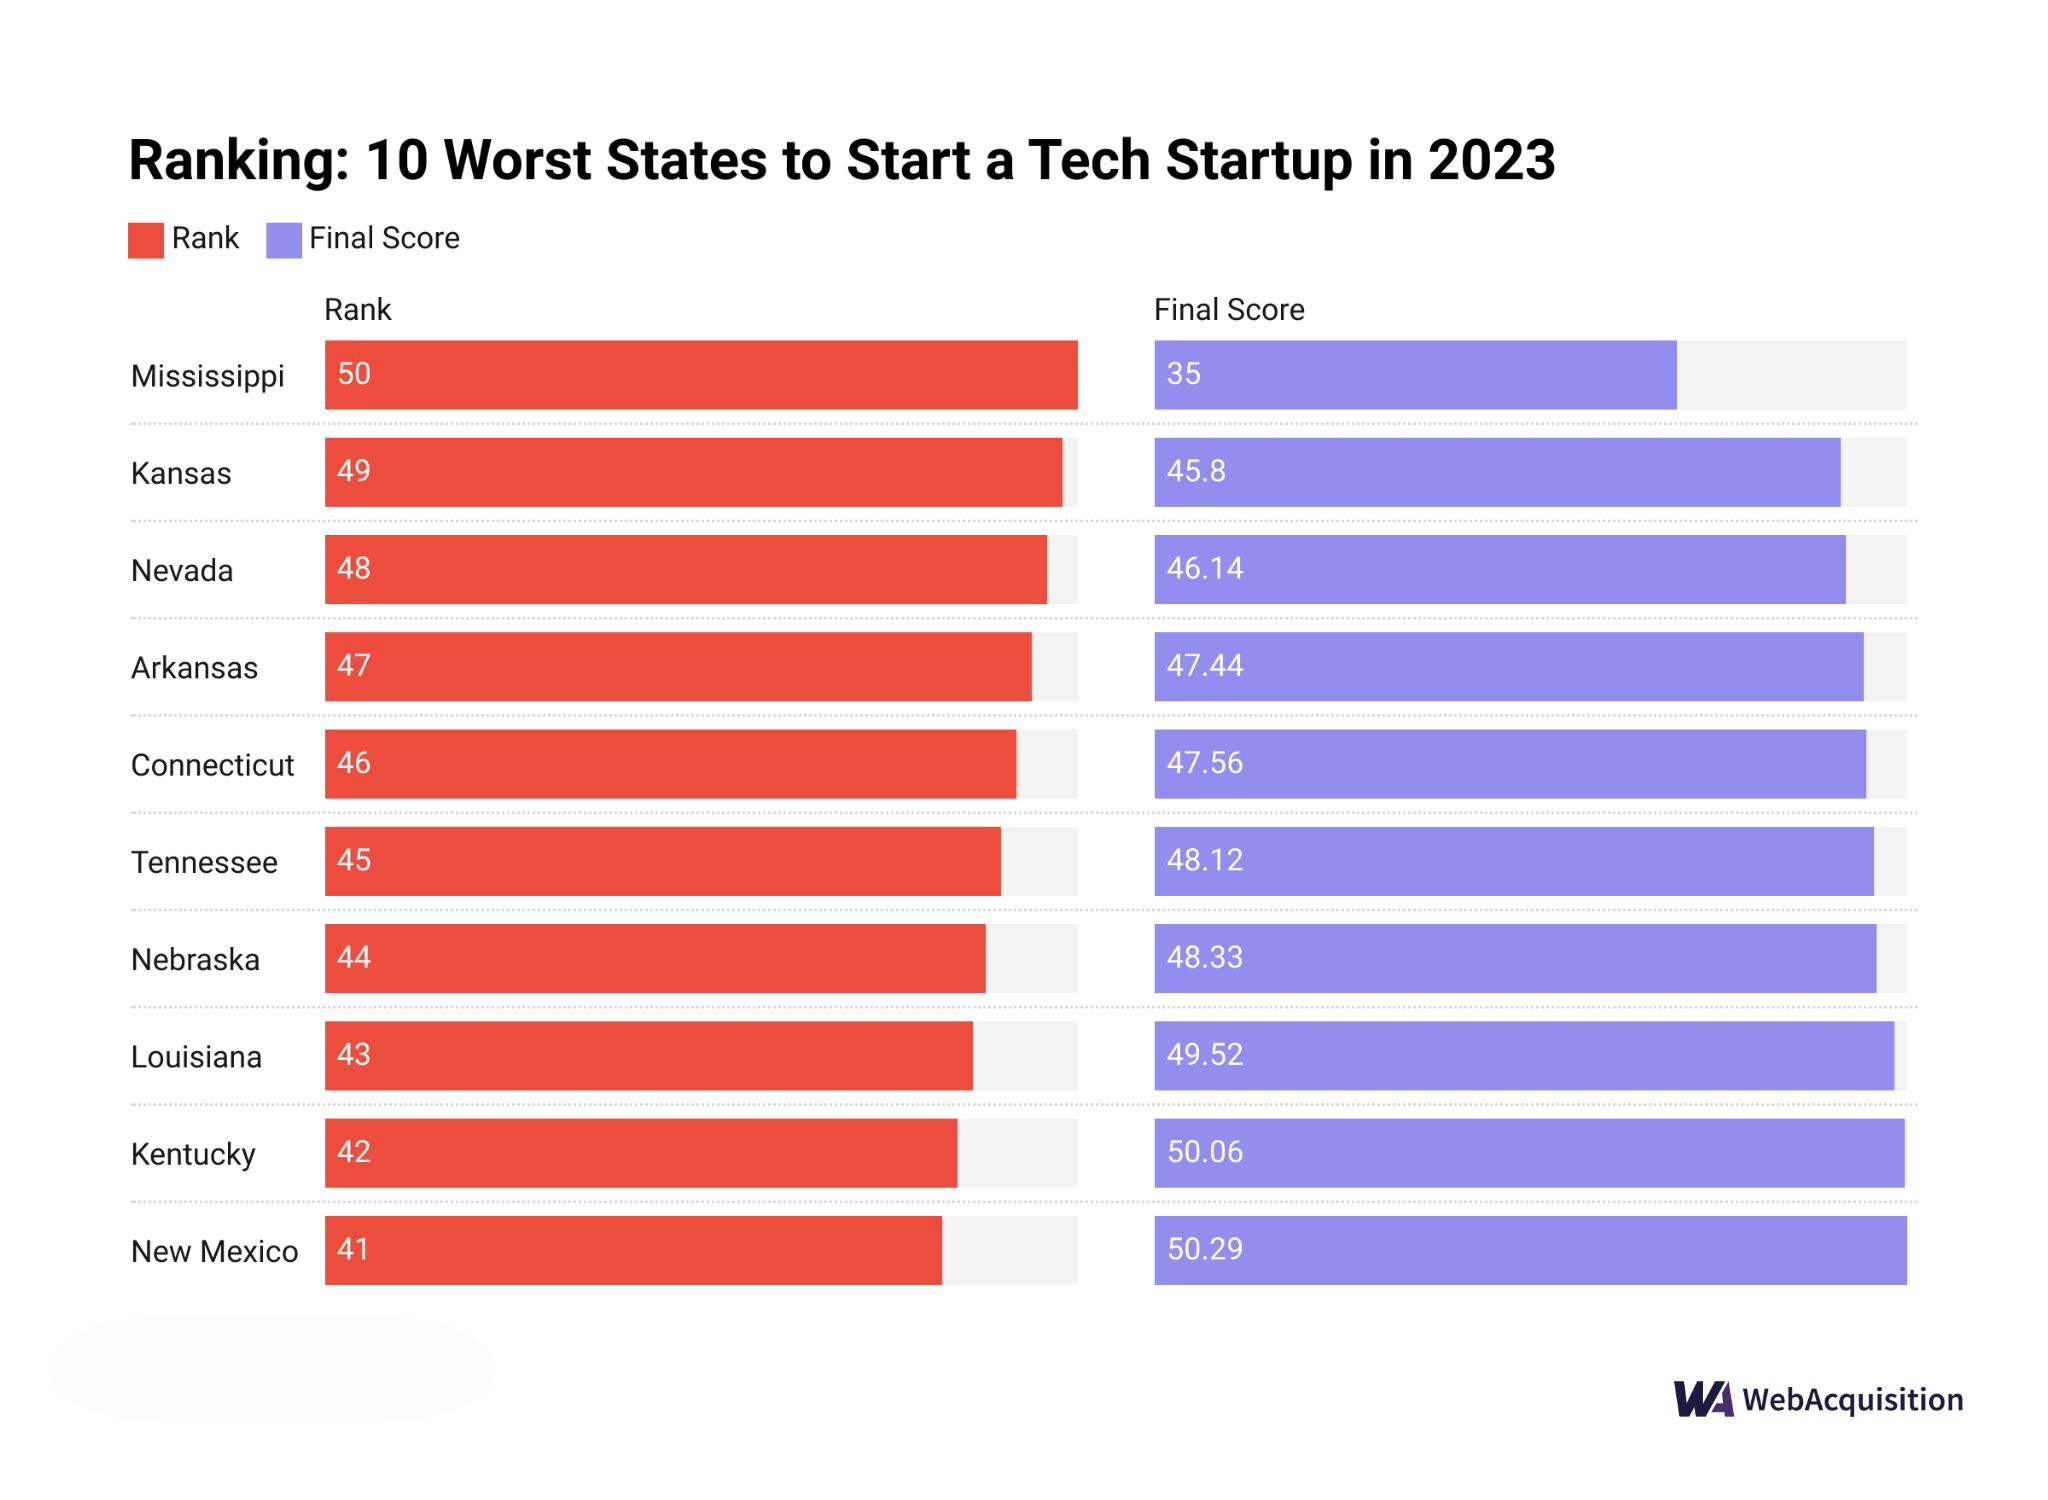 Ranking 10 Worst States to Start a Tech Startup in 2023